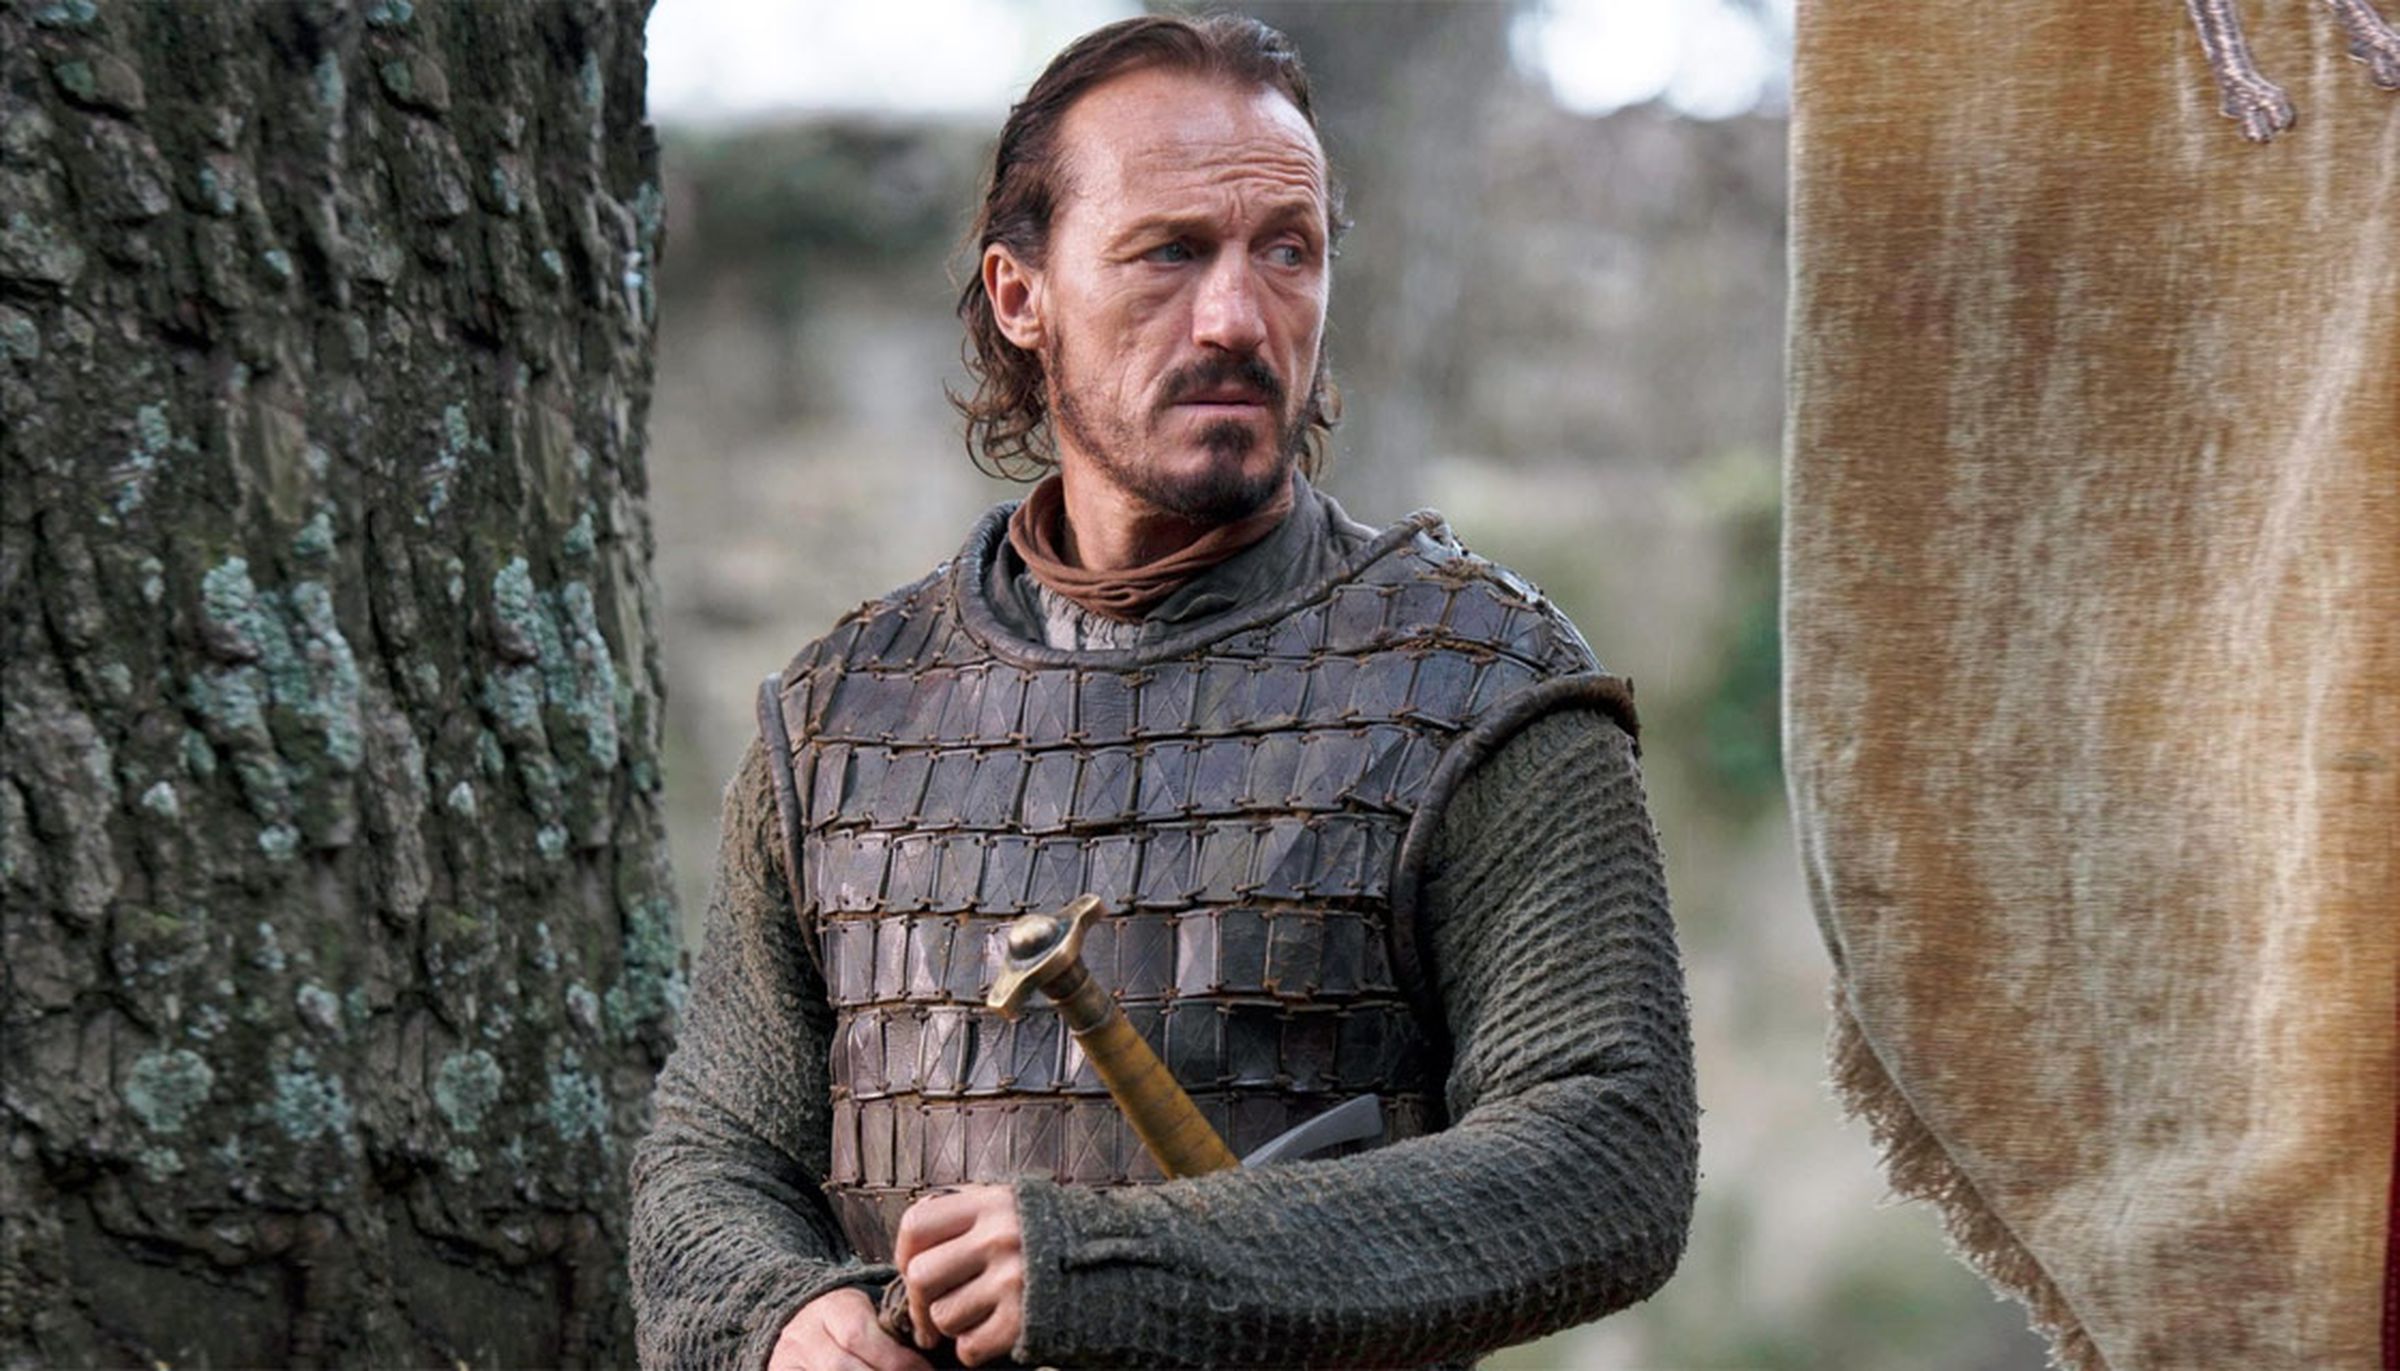 Will Bronn ever get his castle? The algorithm says outlook not so good.